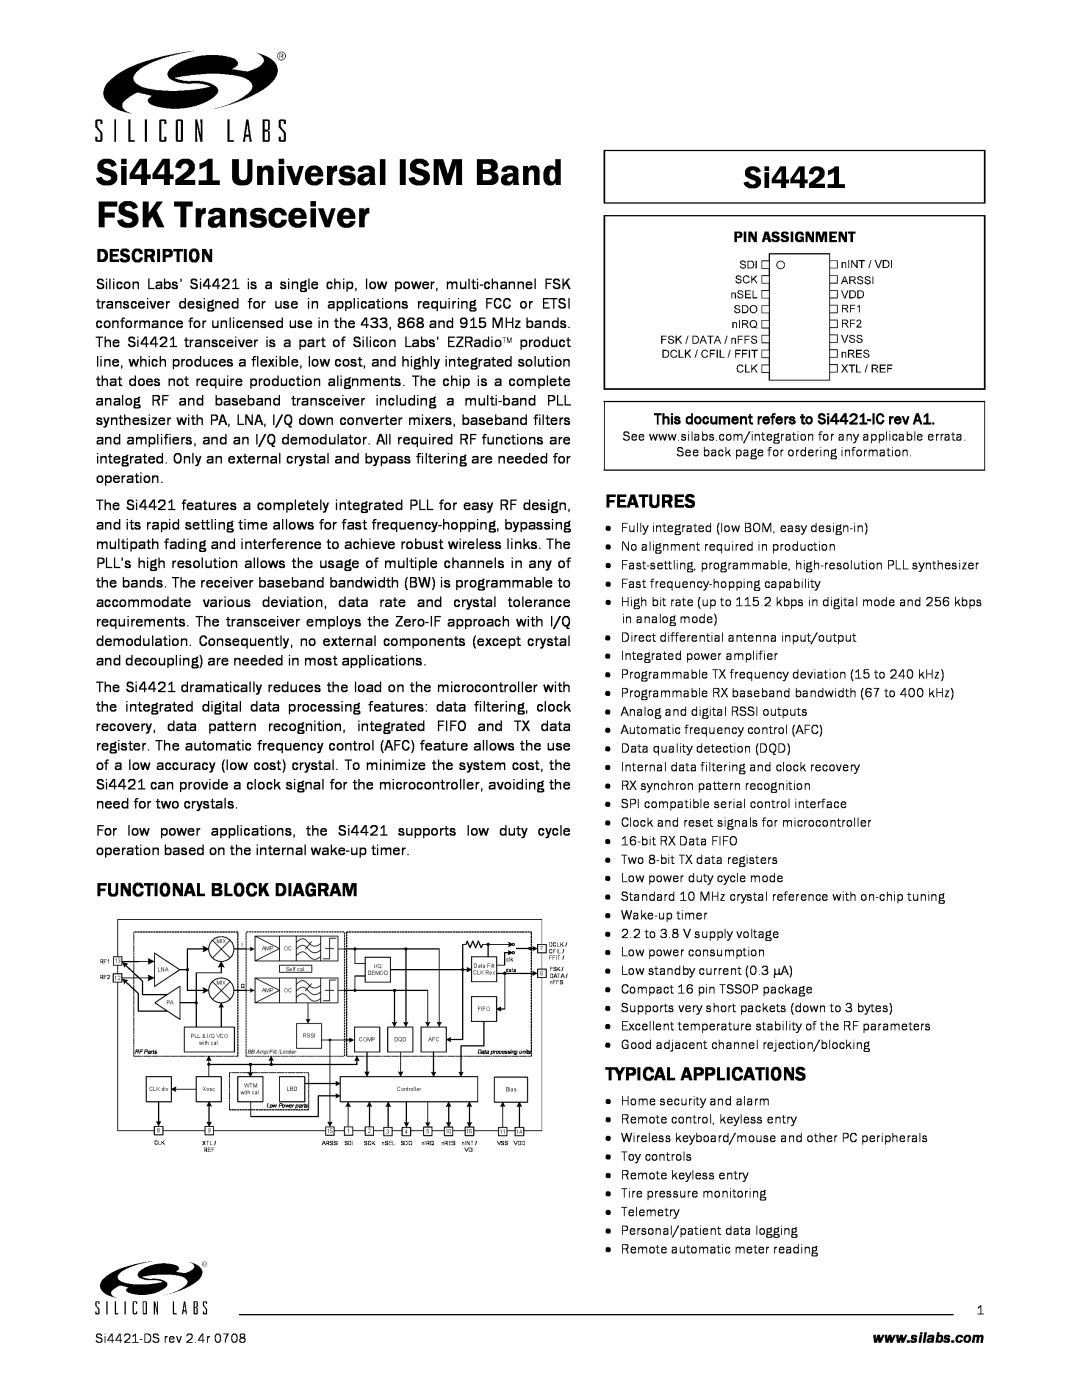 Silicon Laboratories SI4421 manual Description, Functional Block Diagram, Features, Typical Applications, Si4421 